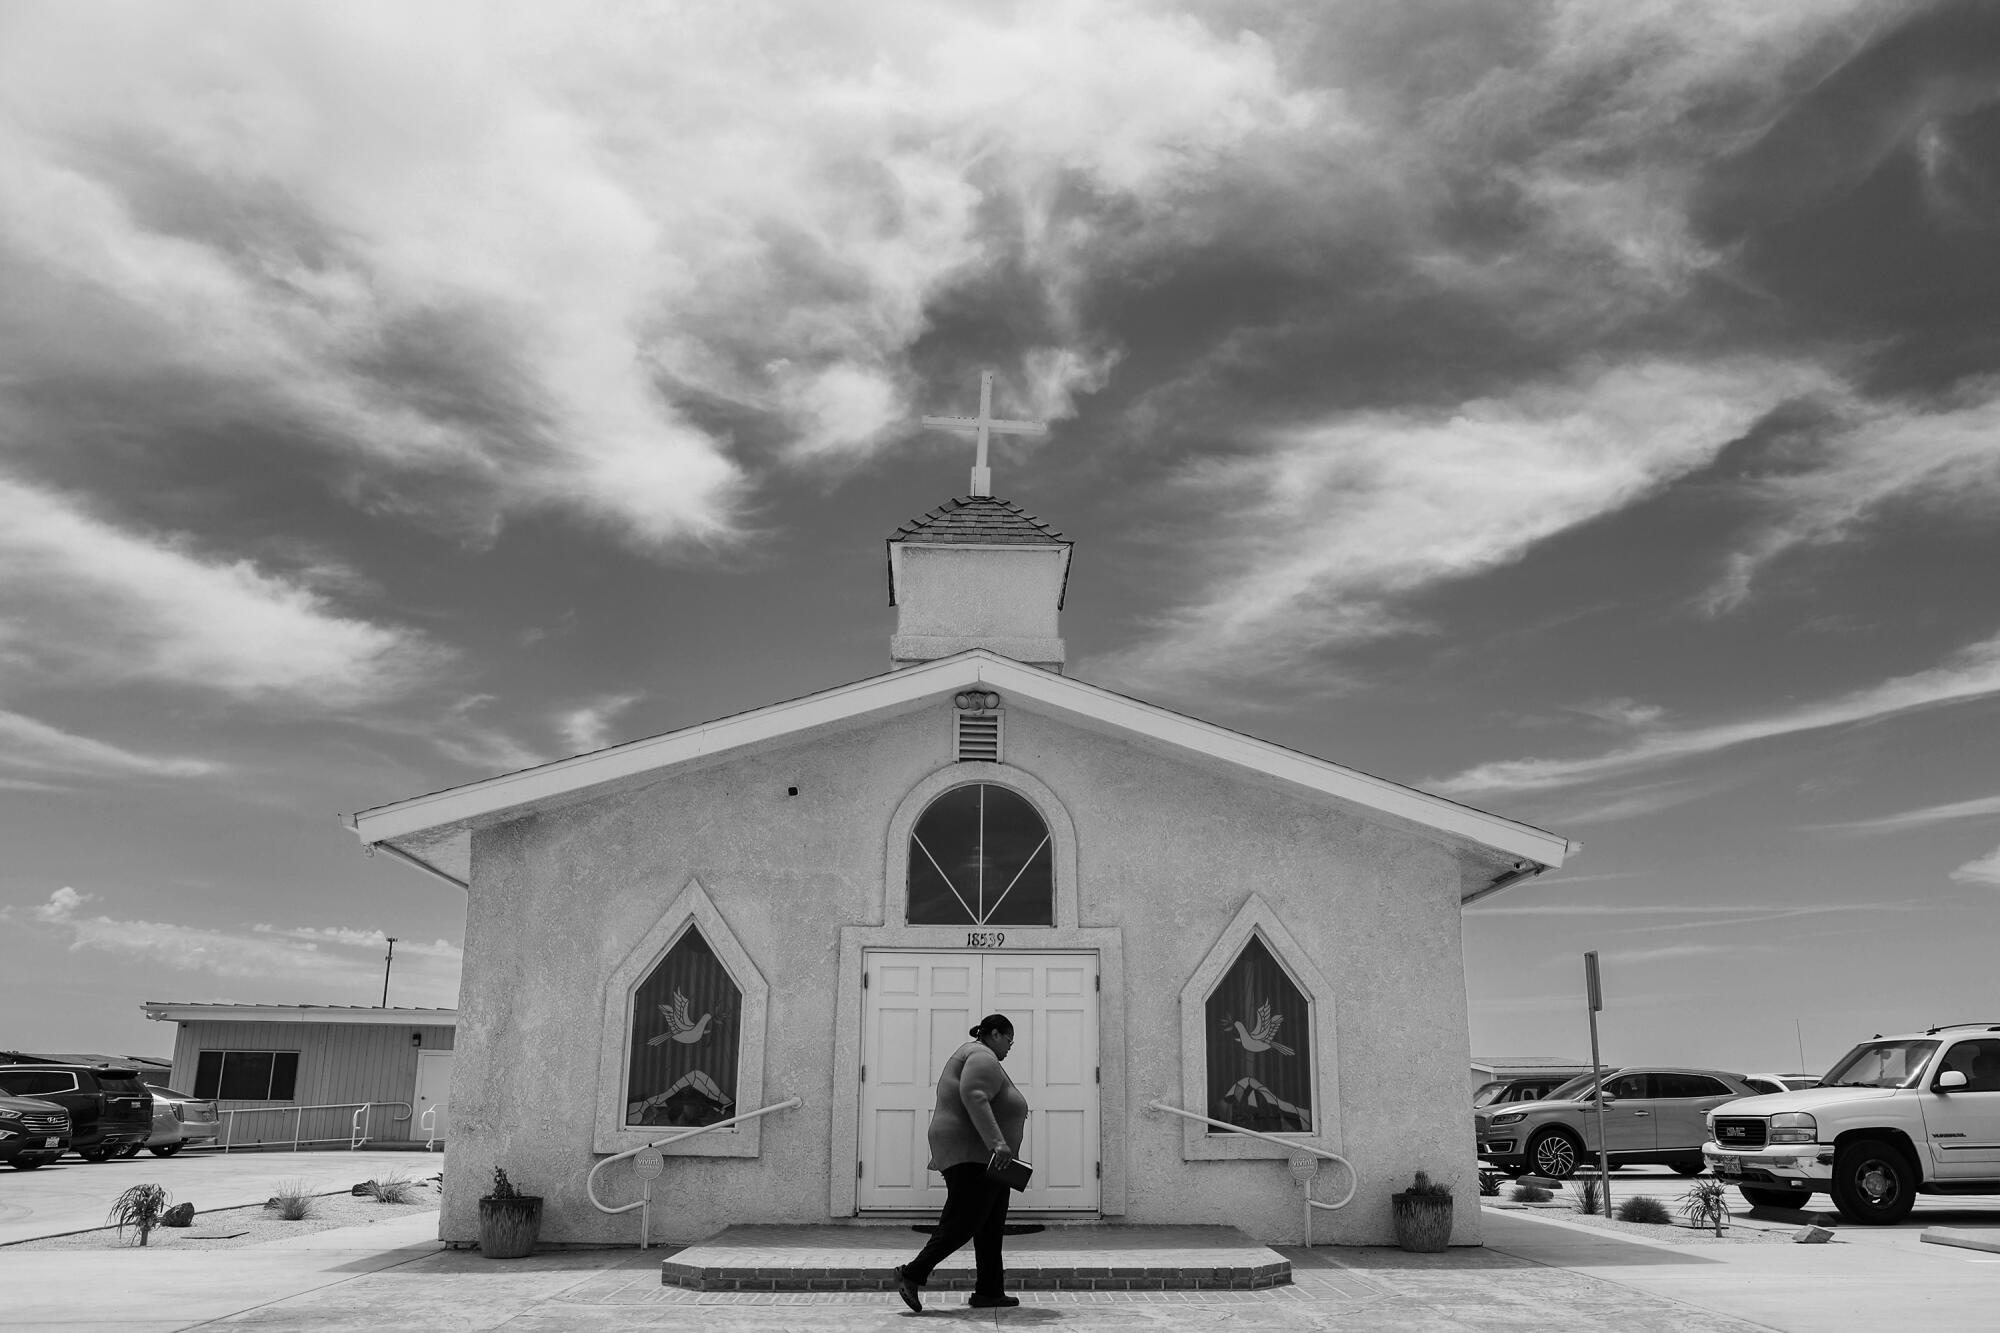 A person walks from a church toward parked cars.